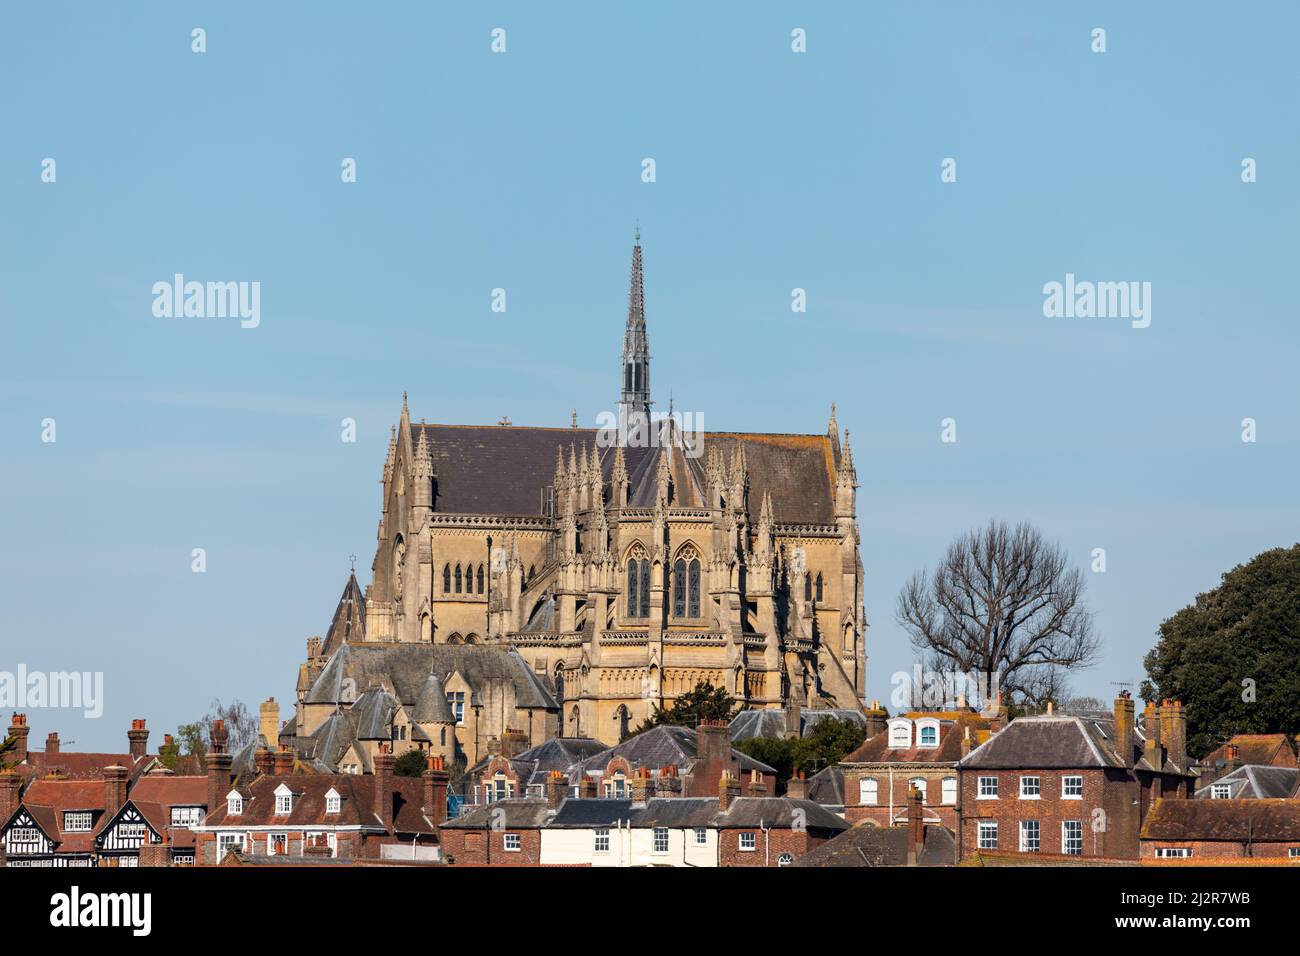 View of the West Sussex market town of Arundel. Cathedral sat towering above the houses below. Stock Photo